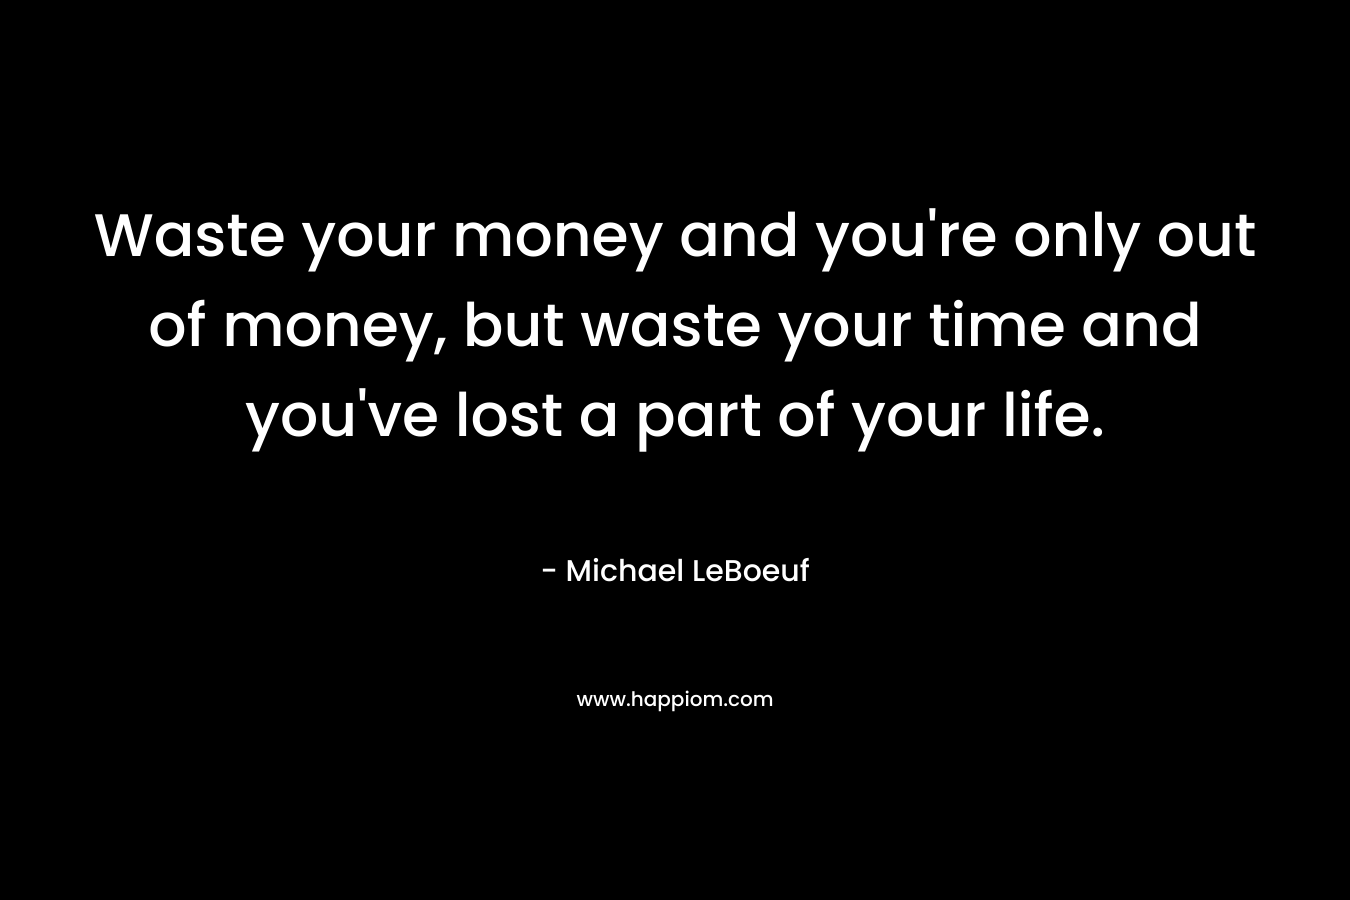 Waste your money and you're only out of money, but waste your time and you've lost a part of your life.